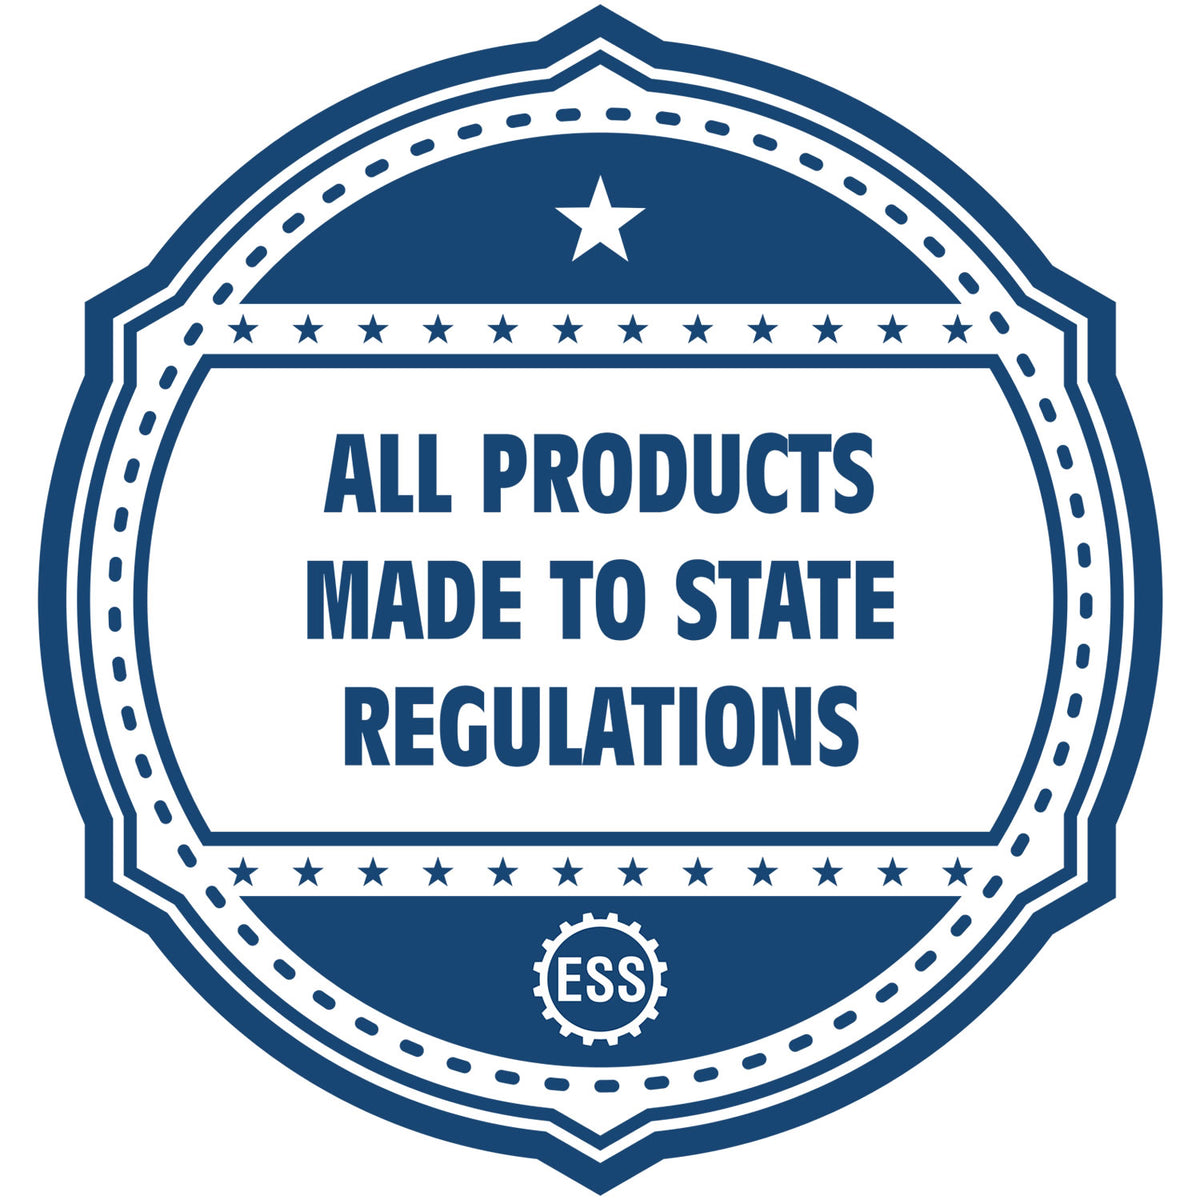 An icon or badge element for the Slim Pre-Inked Oklahoma Professional Engineer Seal Stamp showing that this product is made in compliance with state regulations.